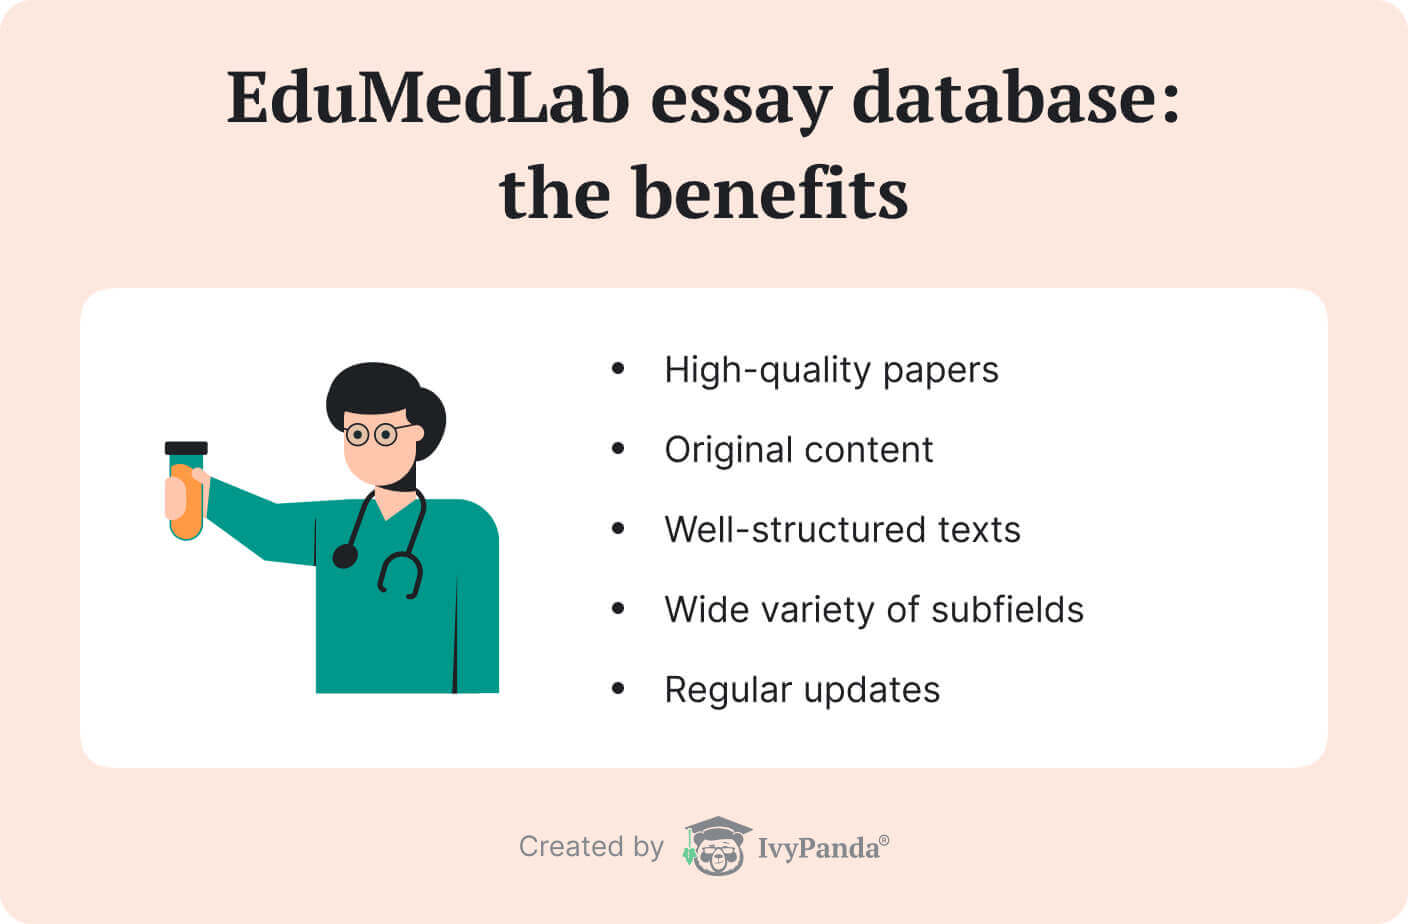 The picture lists the benefits of EduMedLab essay database.